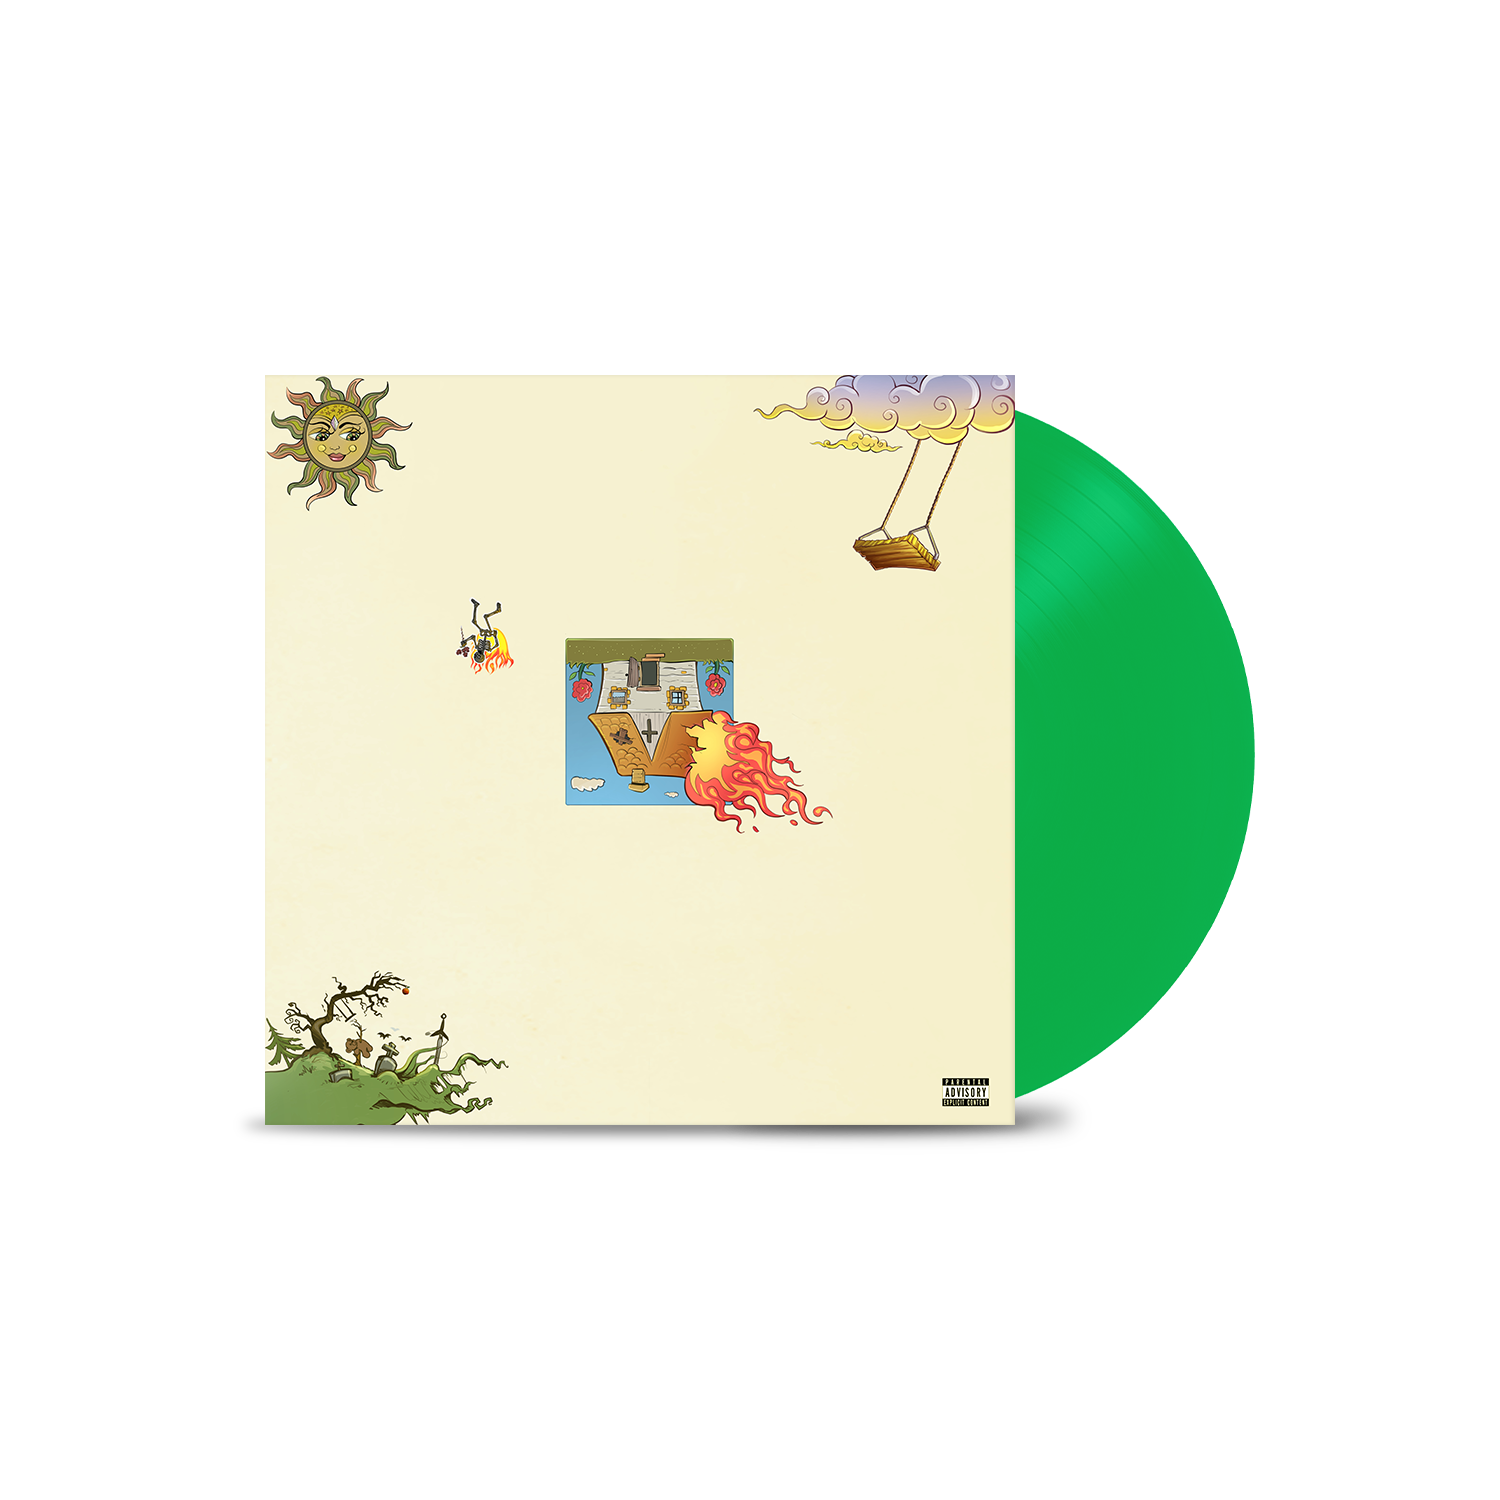 Rema - Rave and Roses: Green Vinyl LP